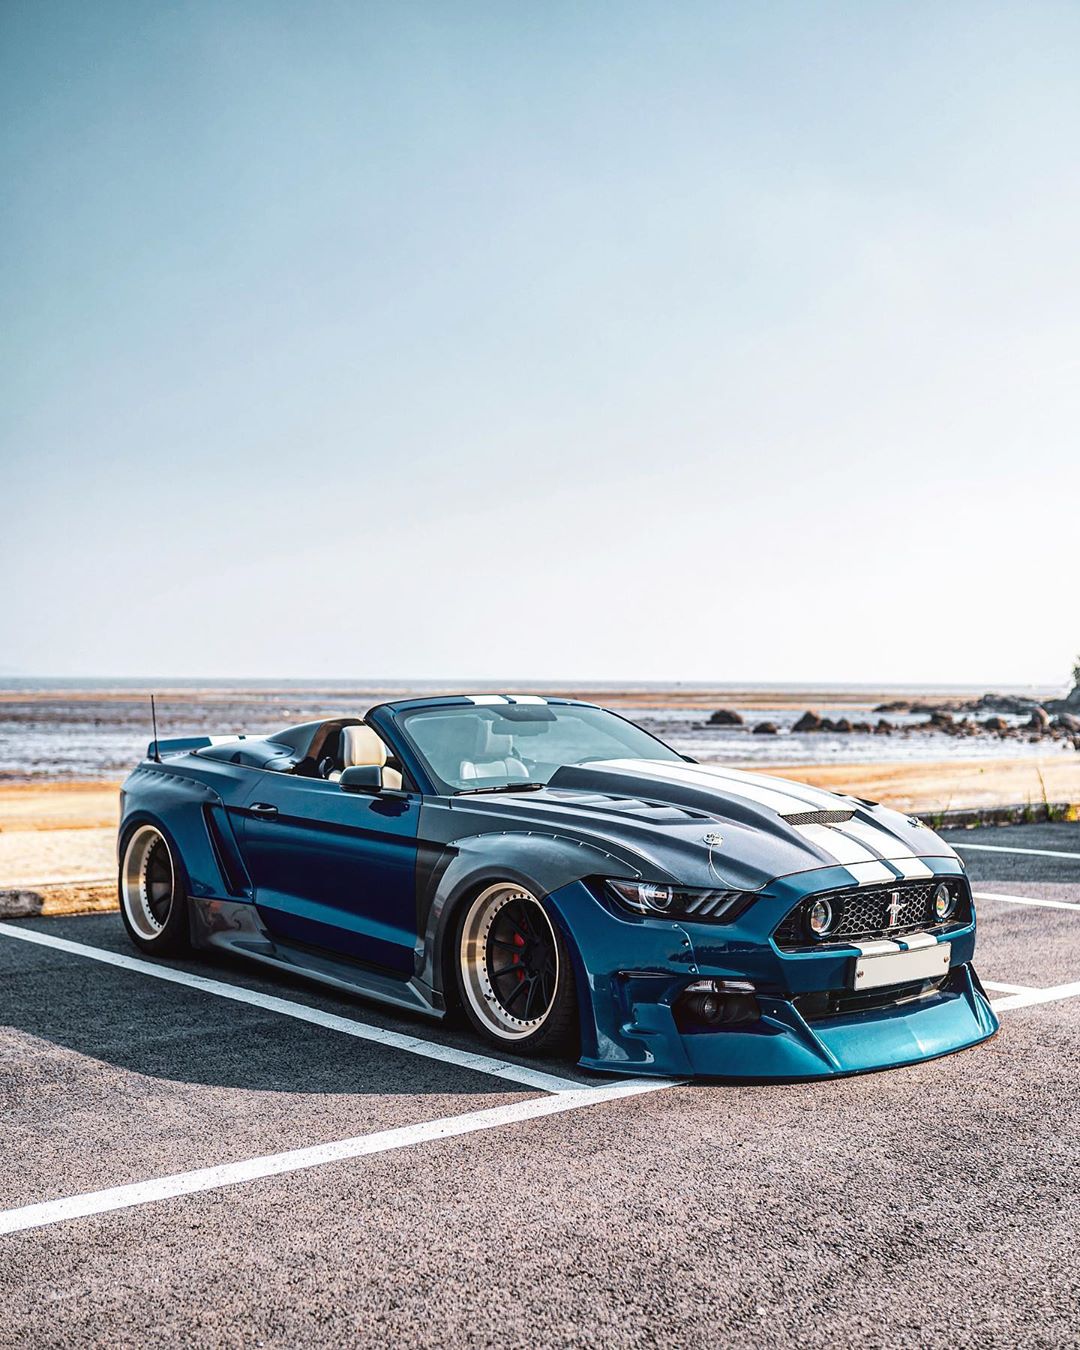 Widebody Ford Mustang Unicorn Has Clinched Roadster Top